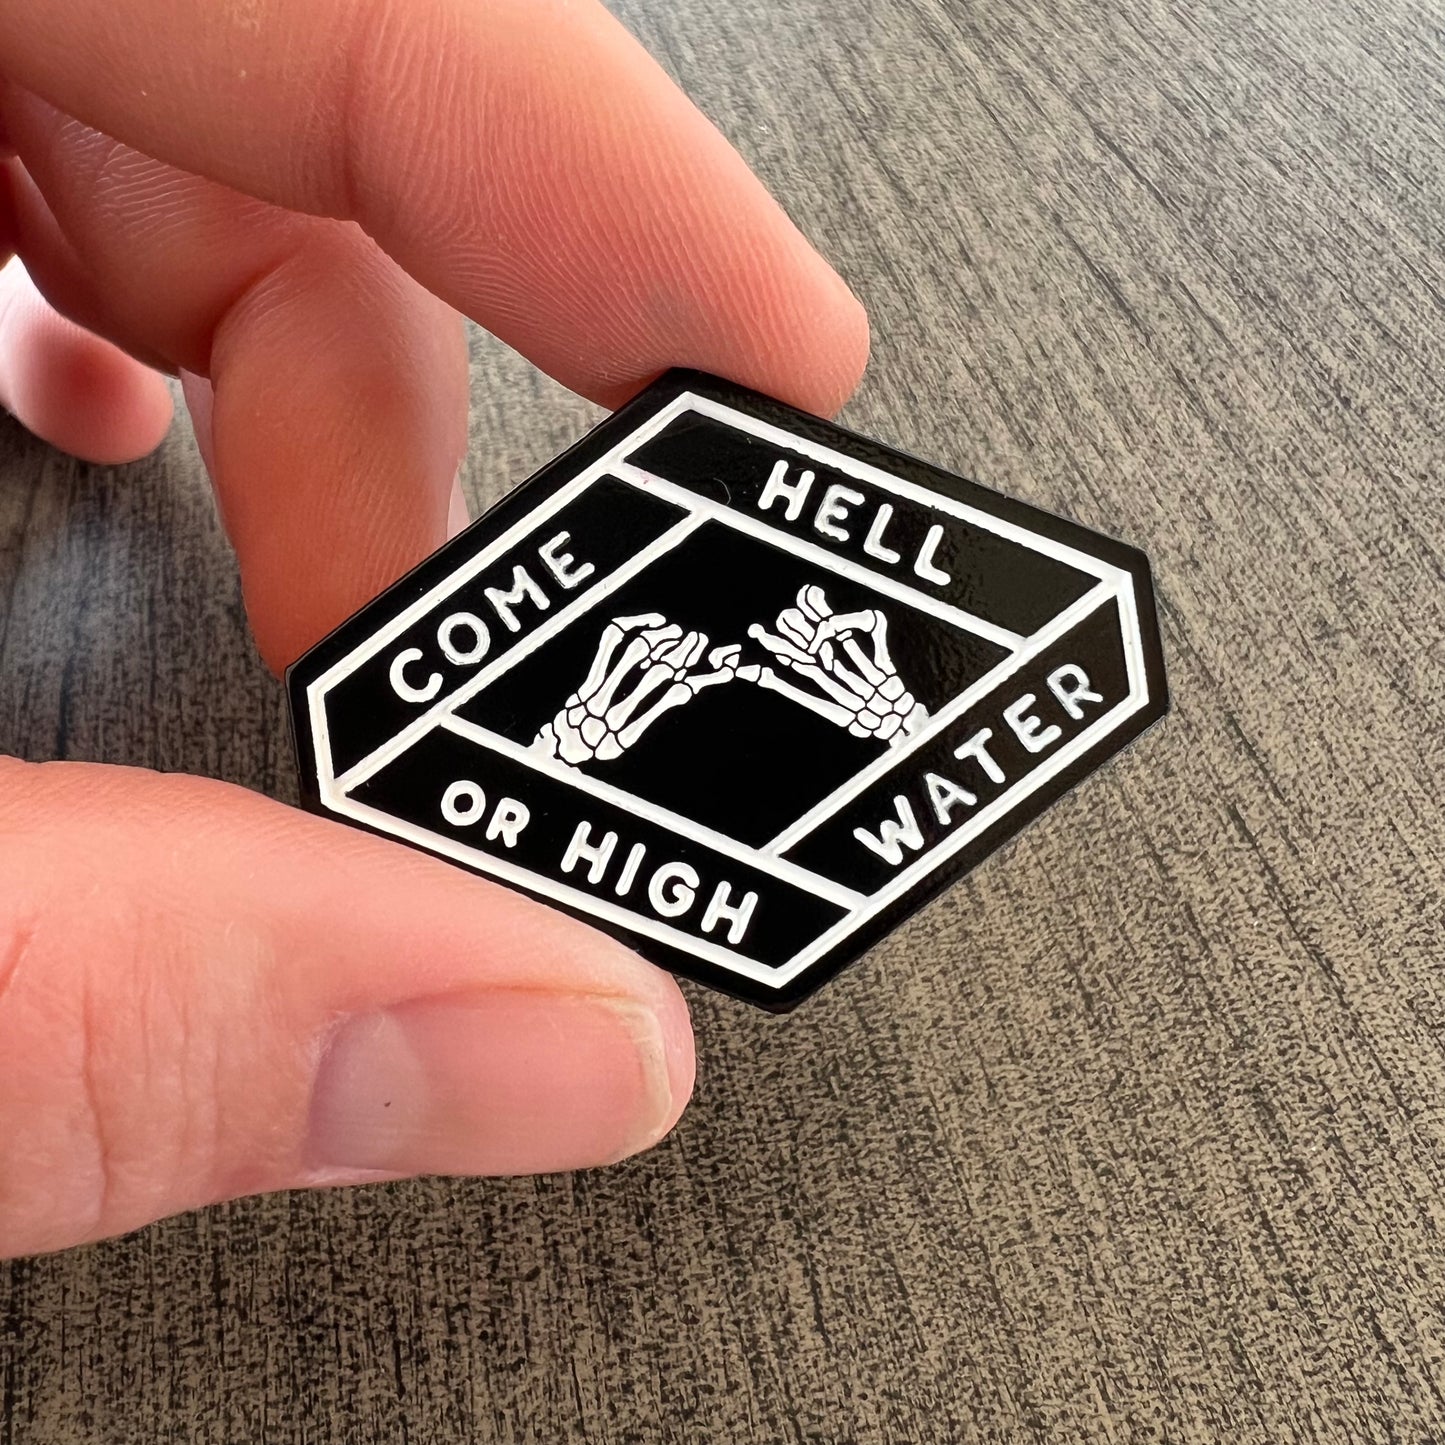 Hell or high water enamel pin